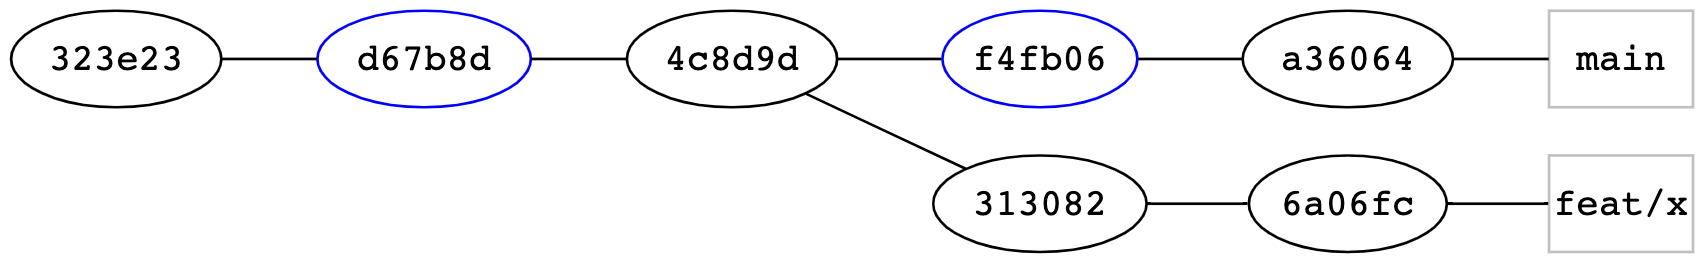 Sample commit graph